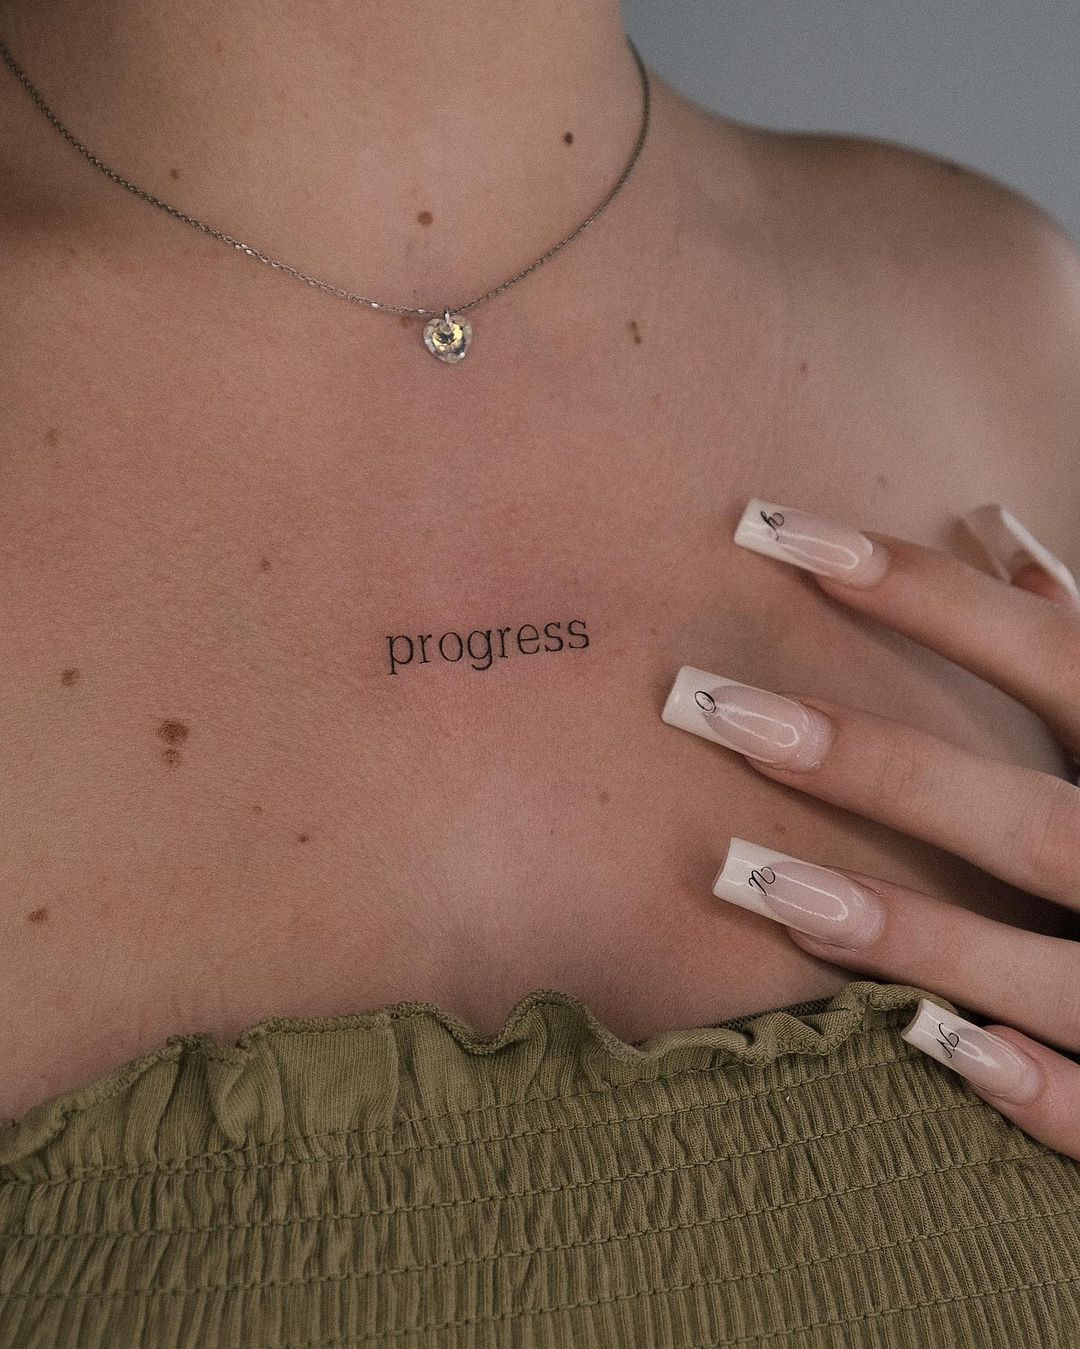 One Word Tattoo on Chest for Women